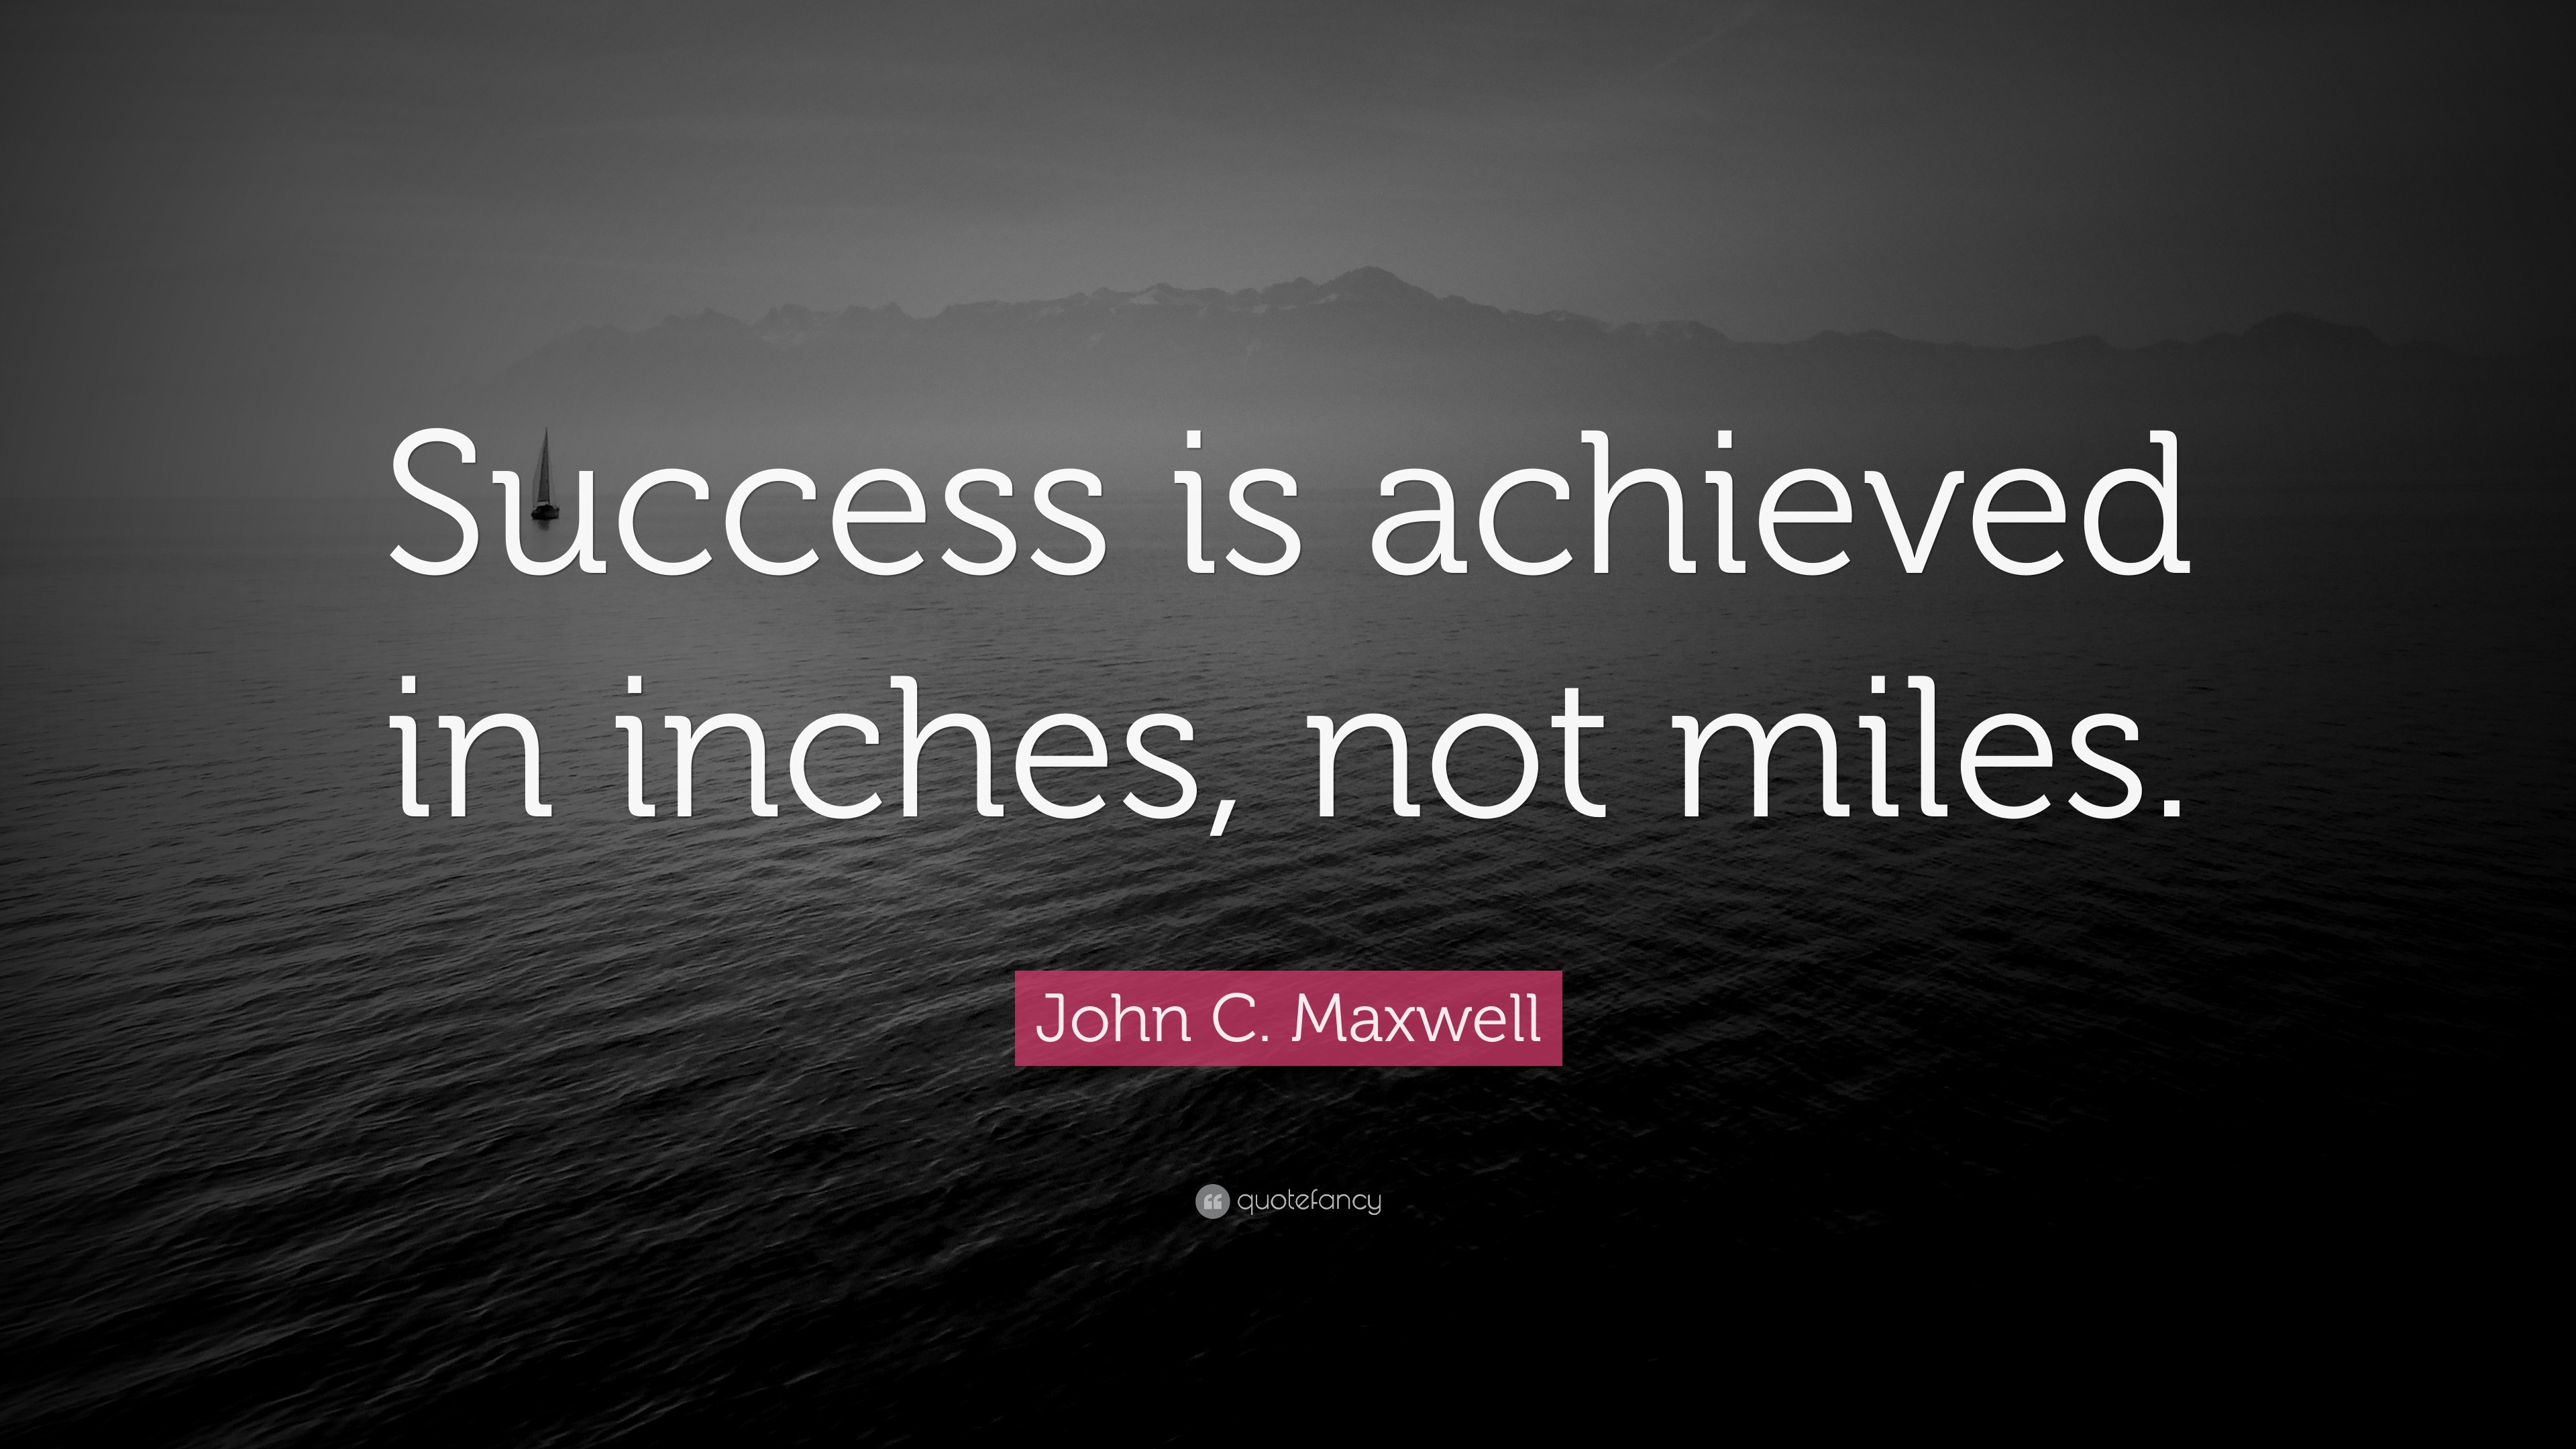 john-c-maxwell-quote-success-is-achieved-in-inches-not-miles